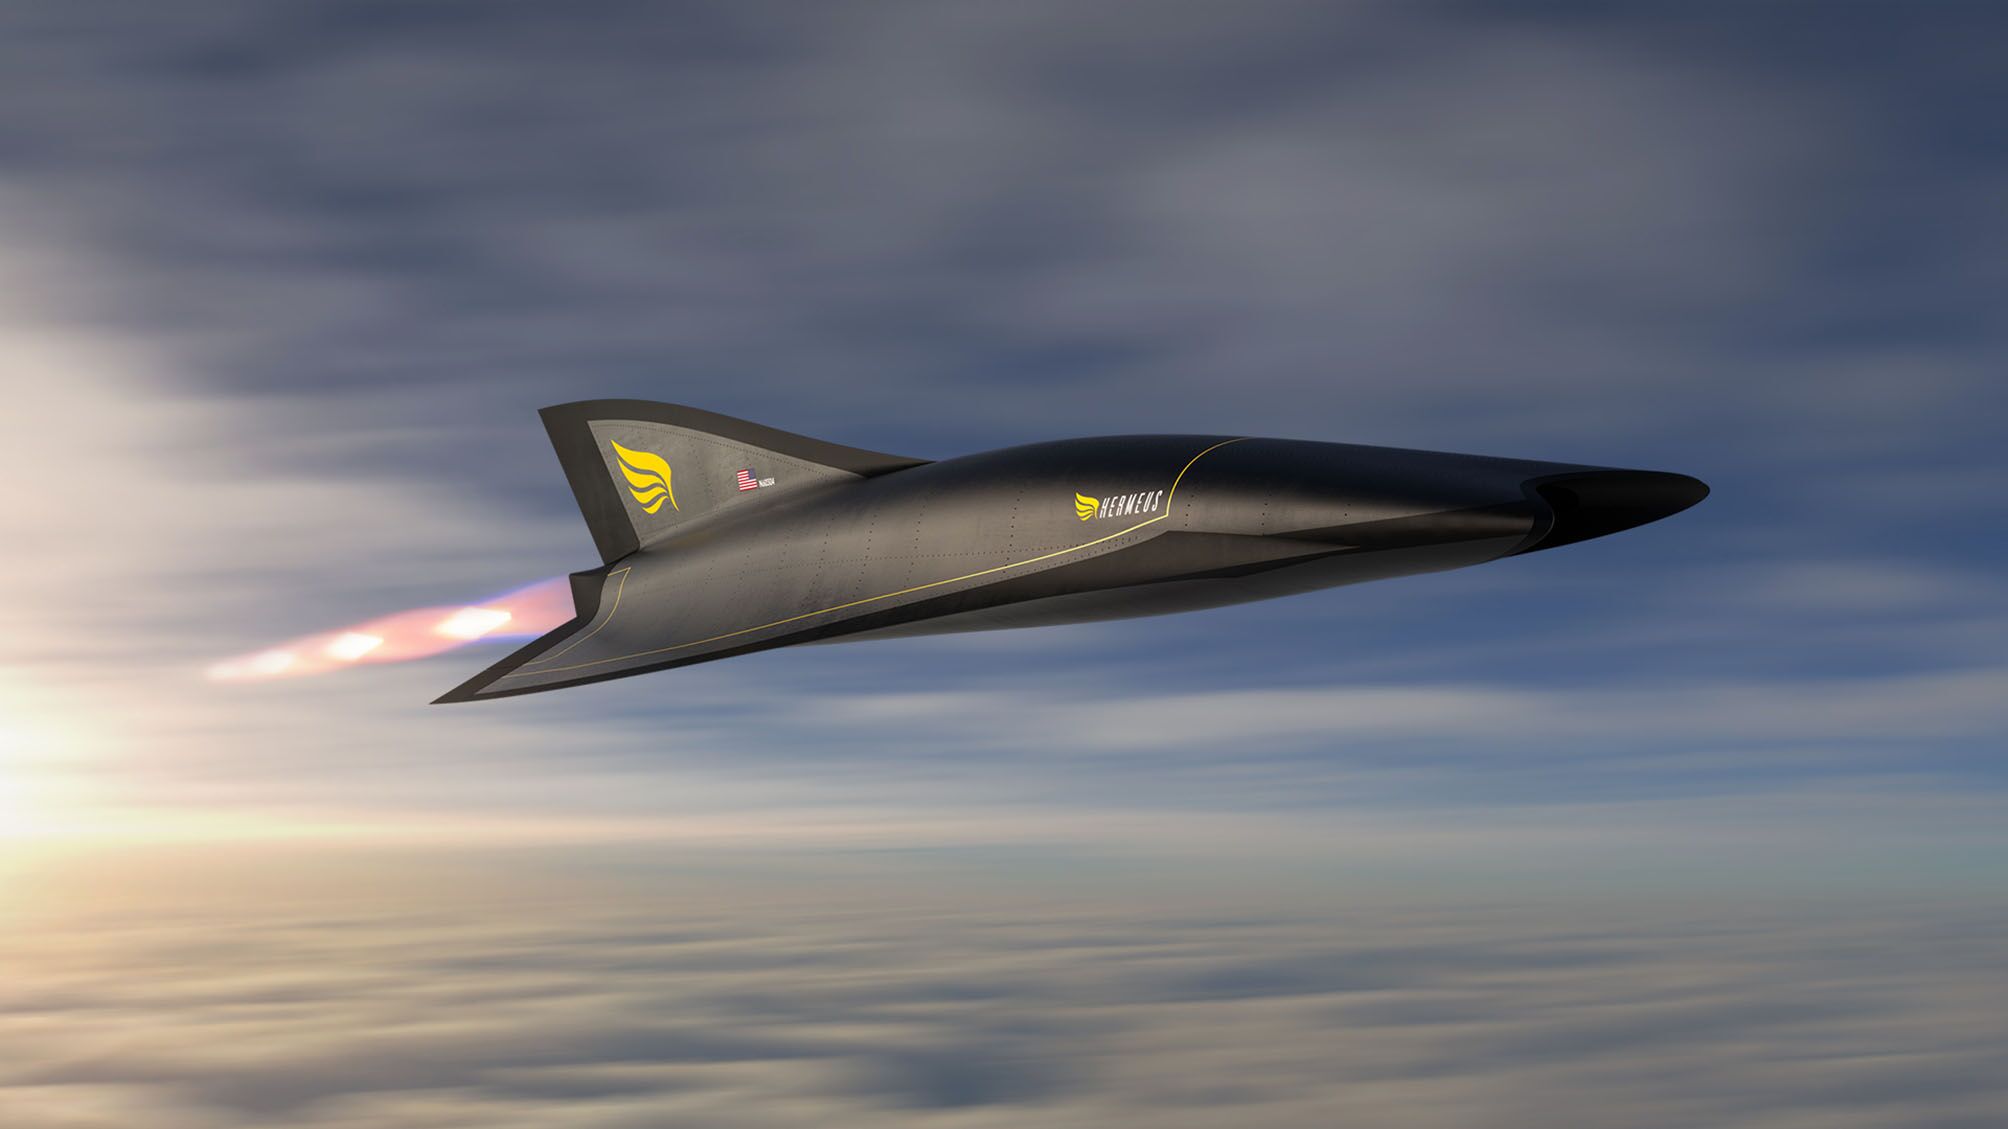 A rendering of Hermeus' Quarterhorse aircraft that will validate the company's proprietary turbine-based combined cycle engine. The US Air Force on 30 July awarded the company a USD60 million jointly funded contract to accelerate the commercial development of hypersonic aircraft and propulsion systems. (Hermeus)